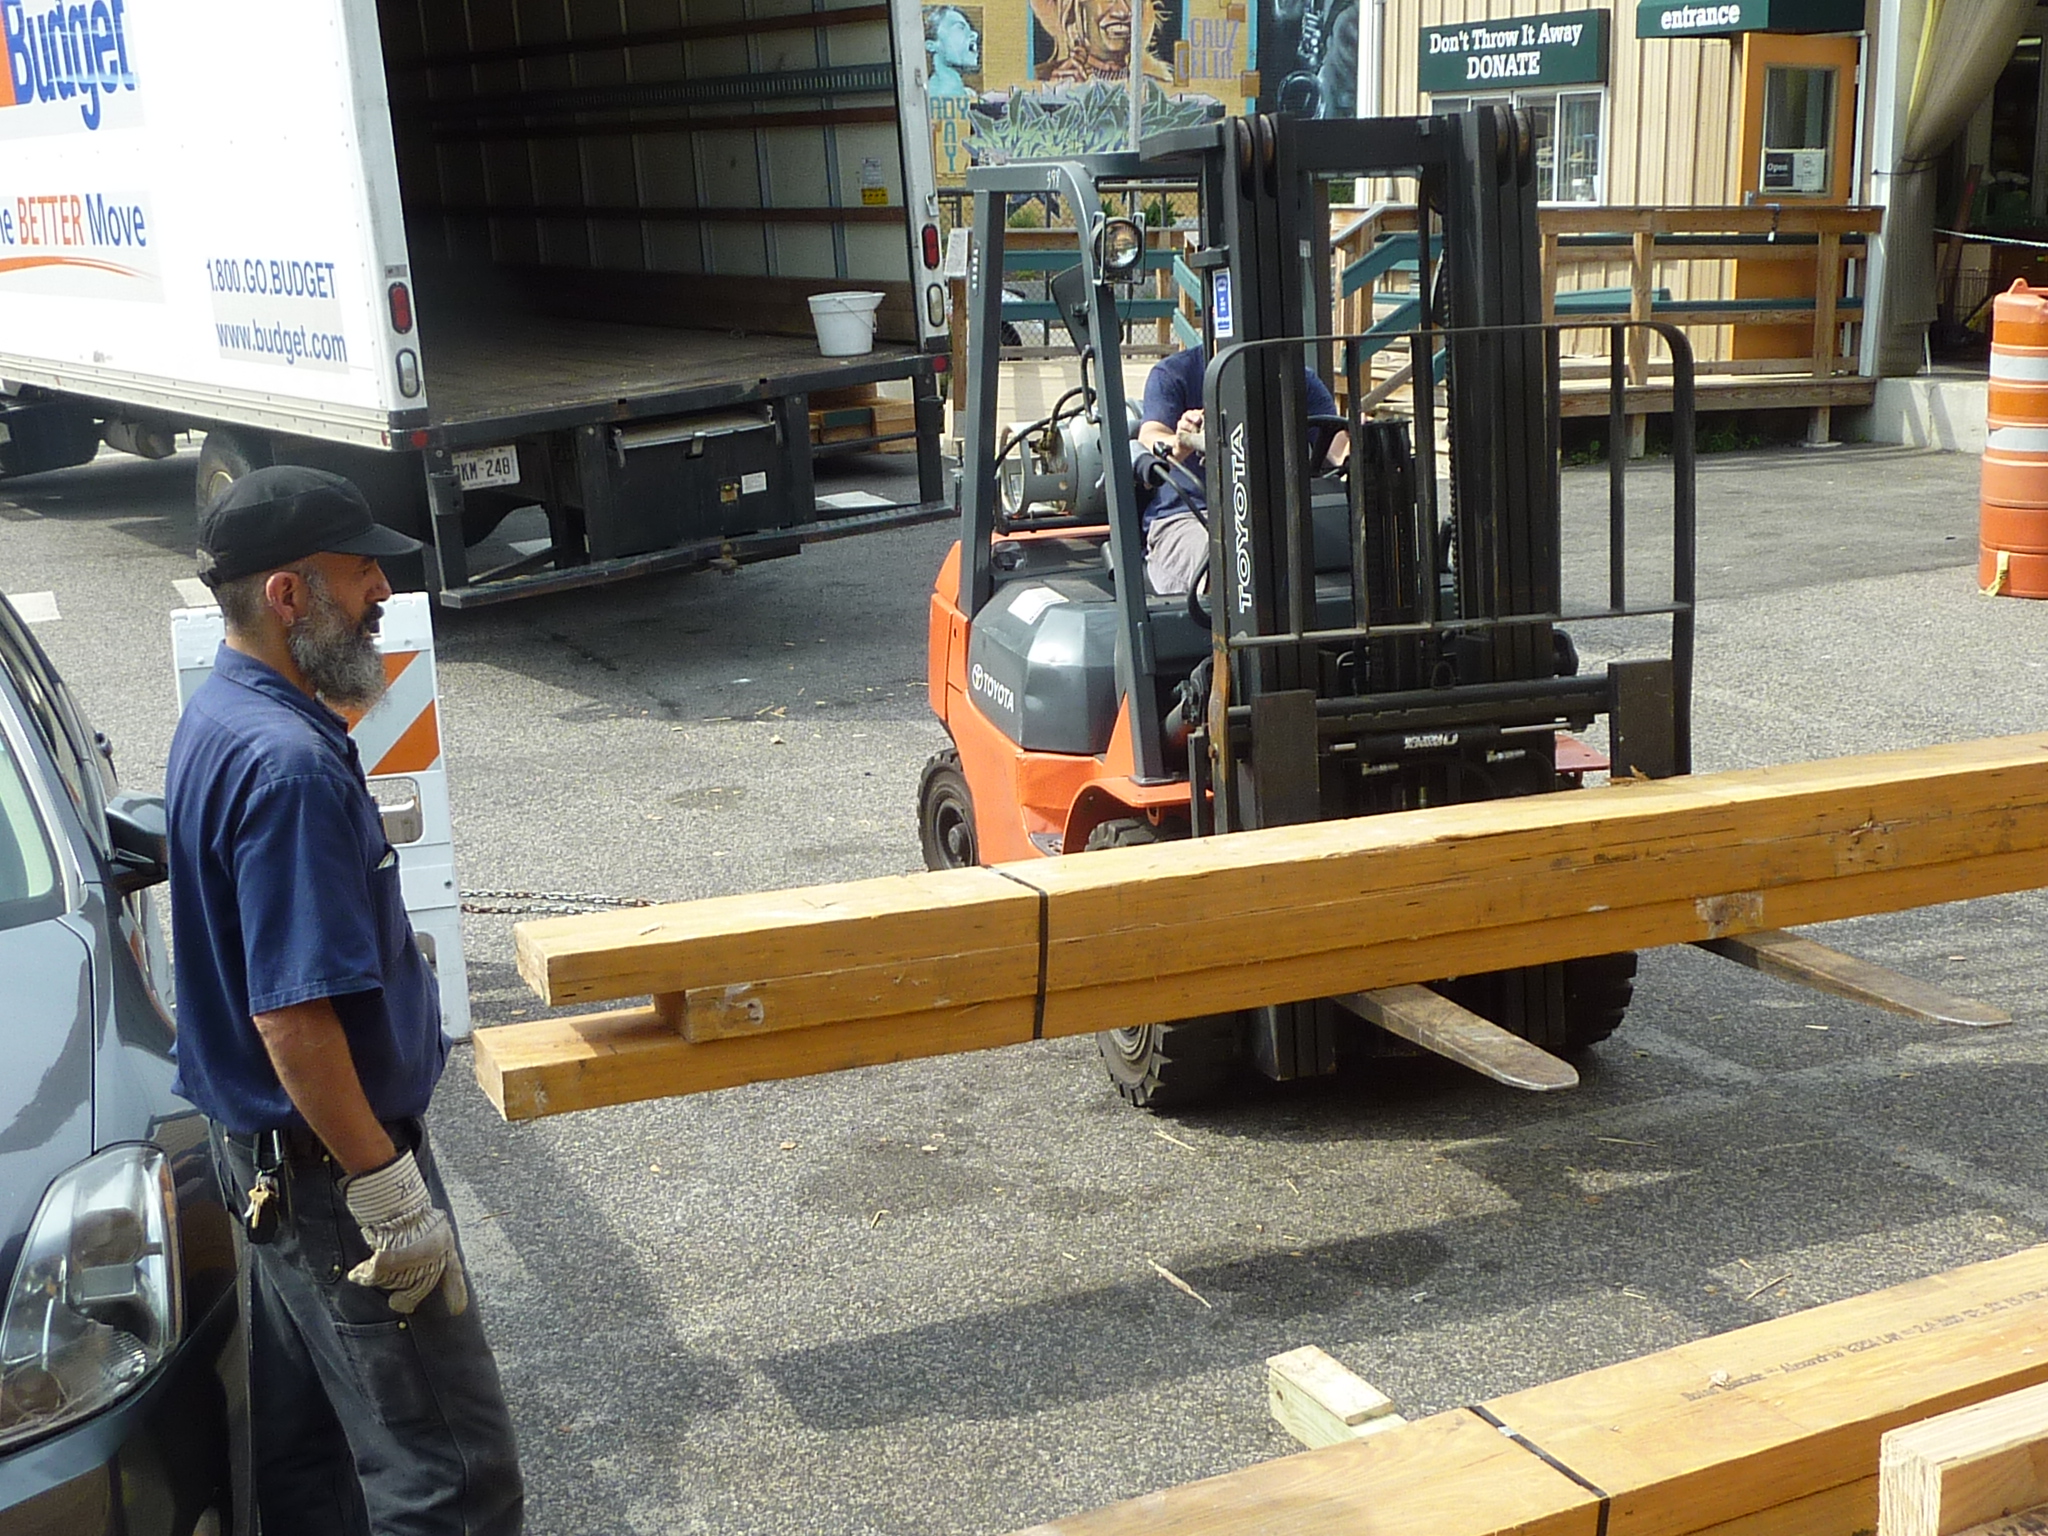 Forklift helps staffers move materials